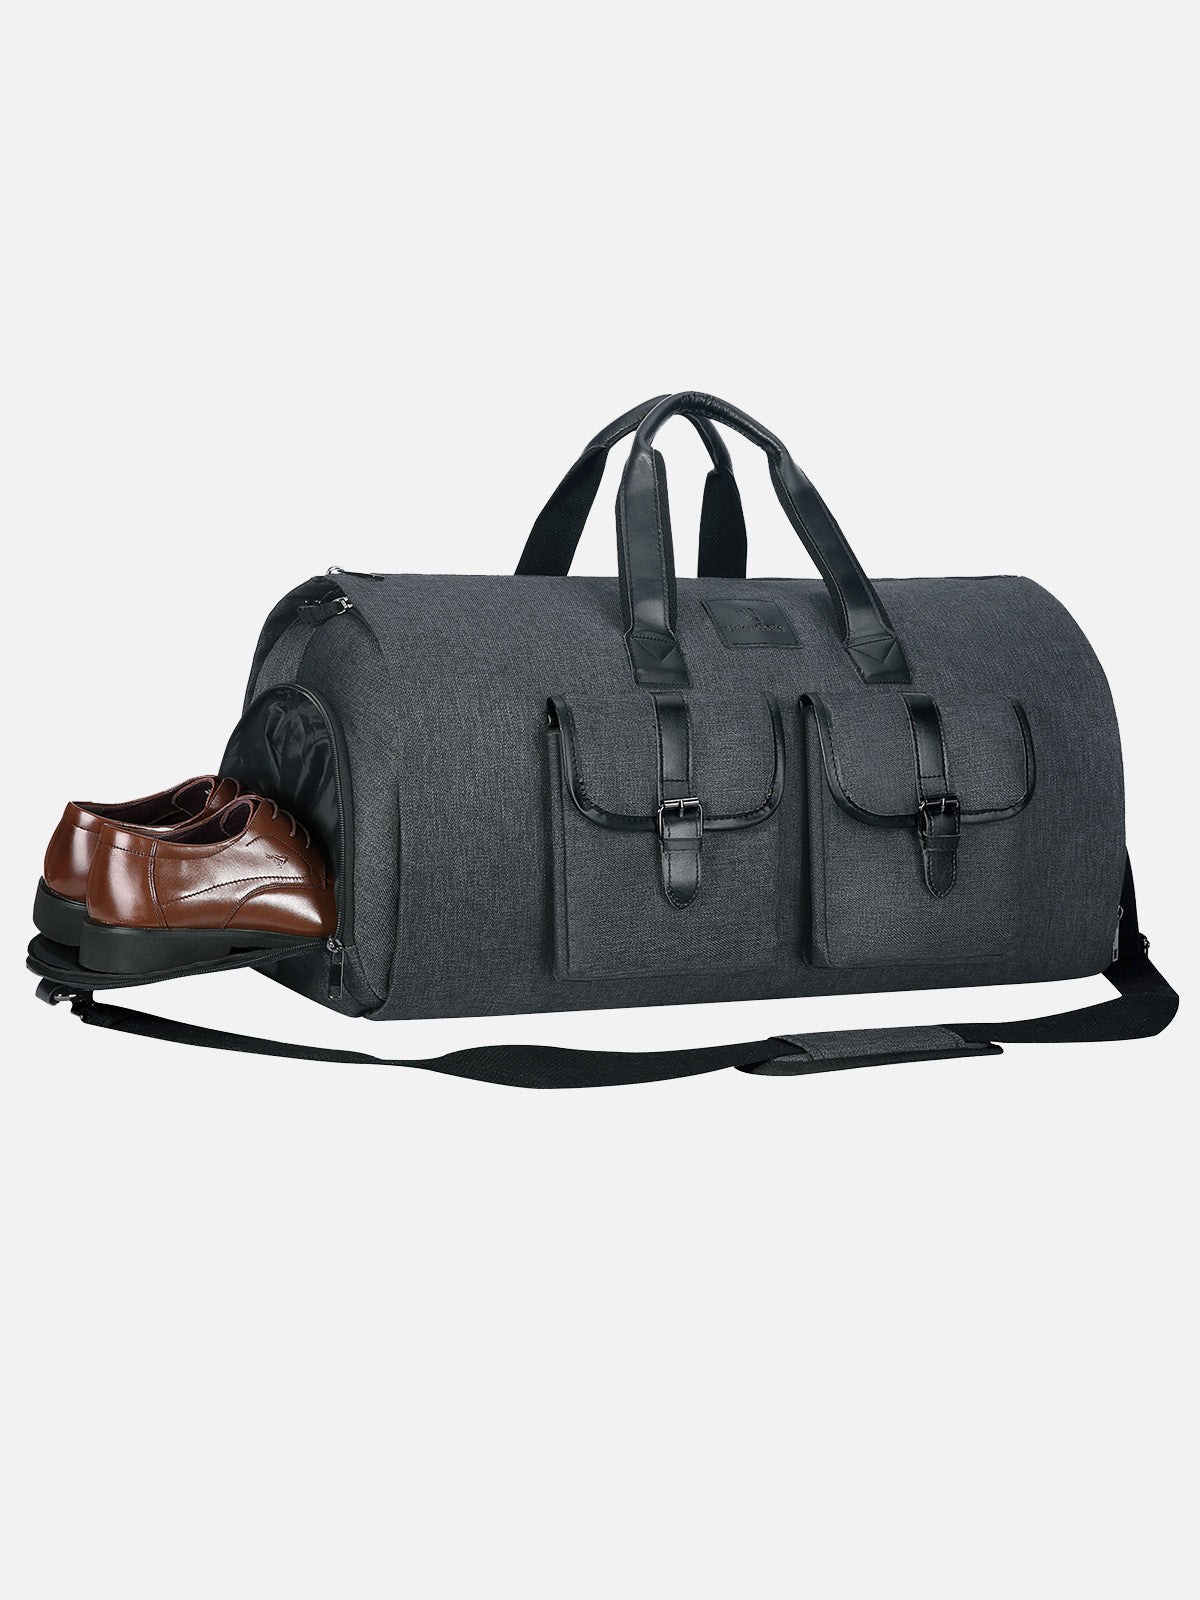 Uniquebela Carry-on Duffel Bag for Suit Travel Bag with Shoes Pouch for Men Women